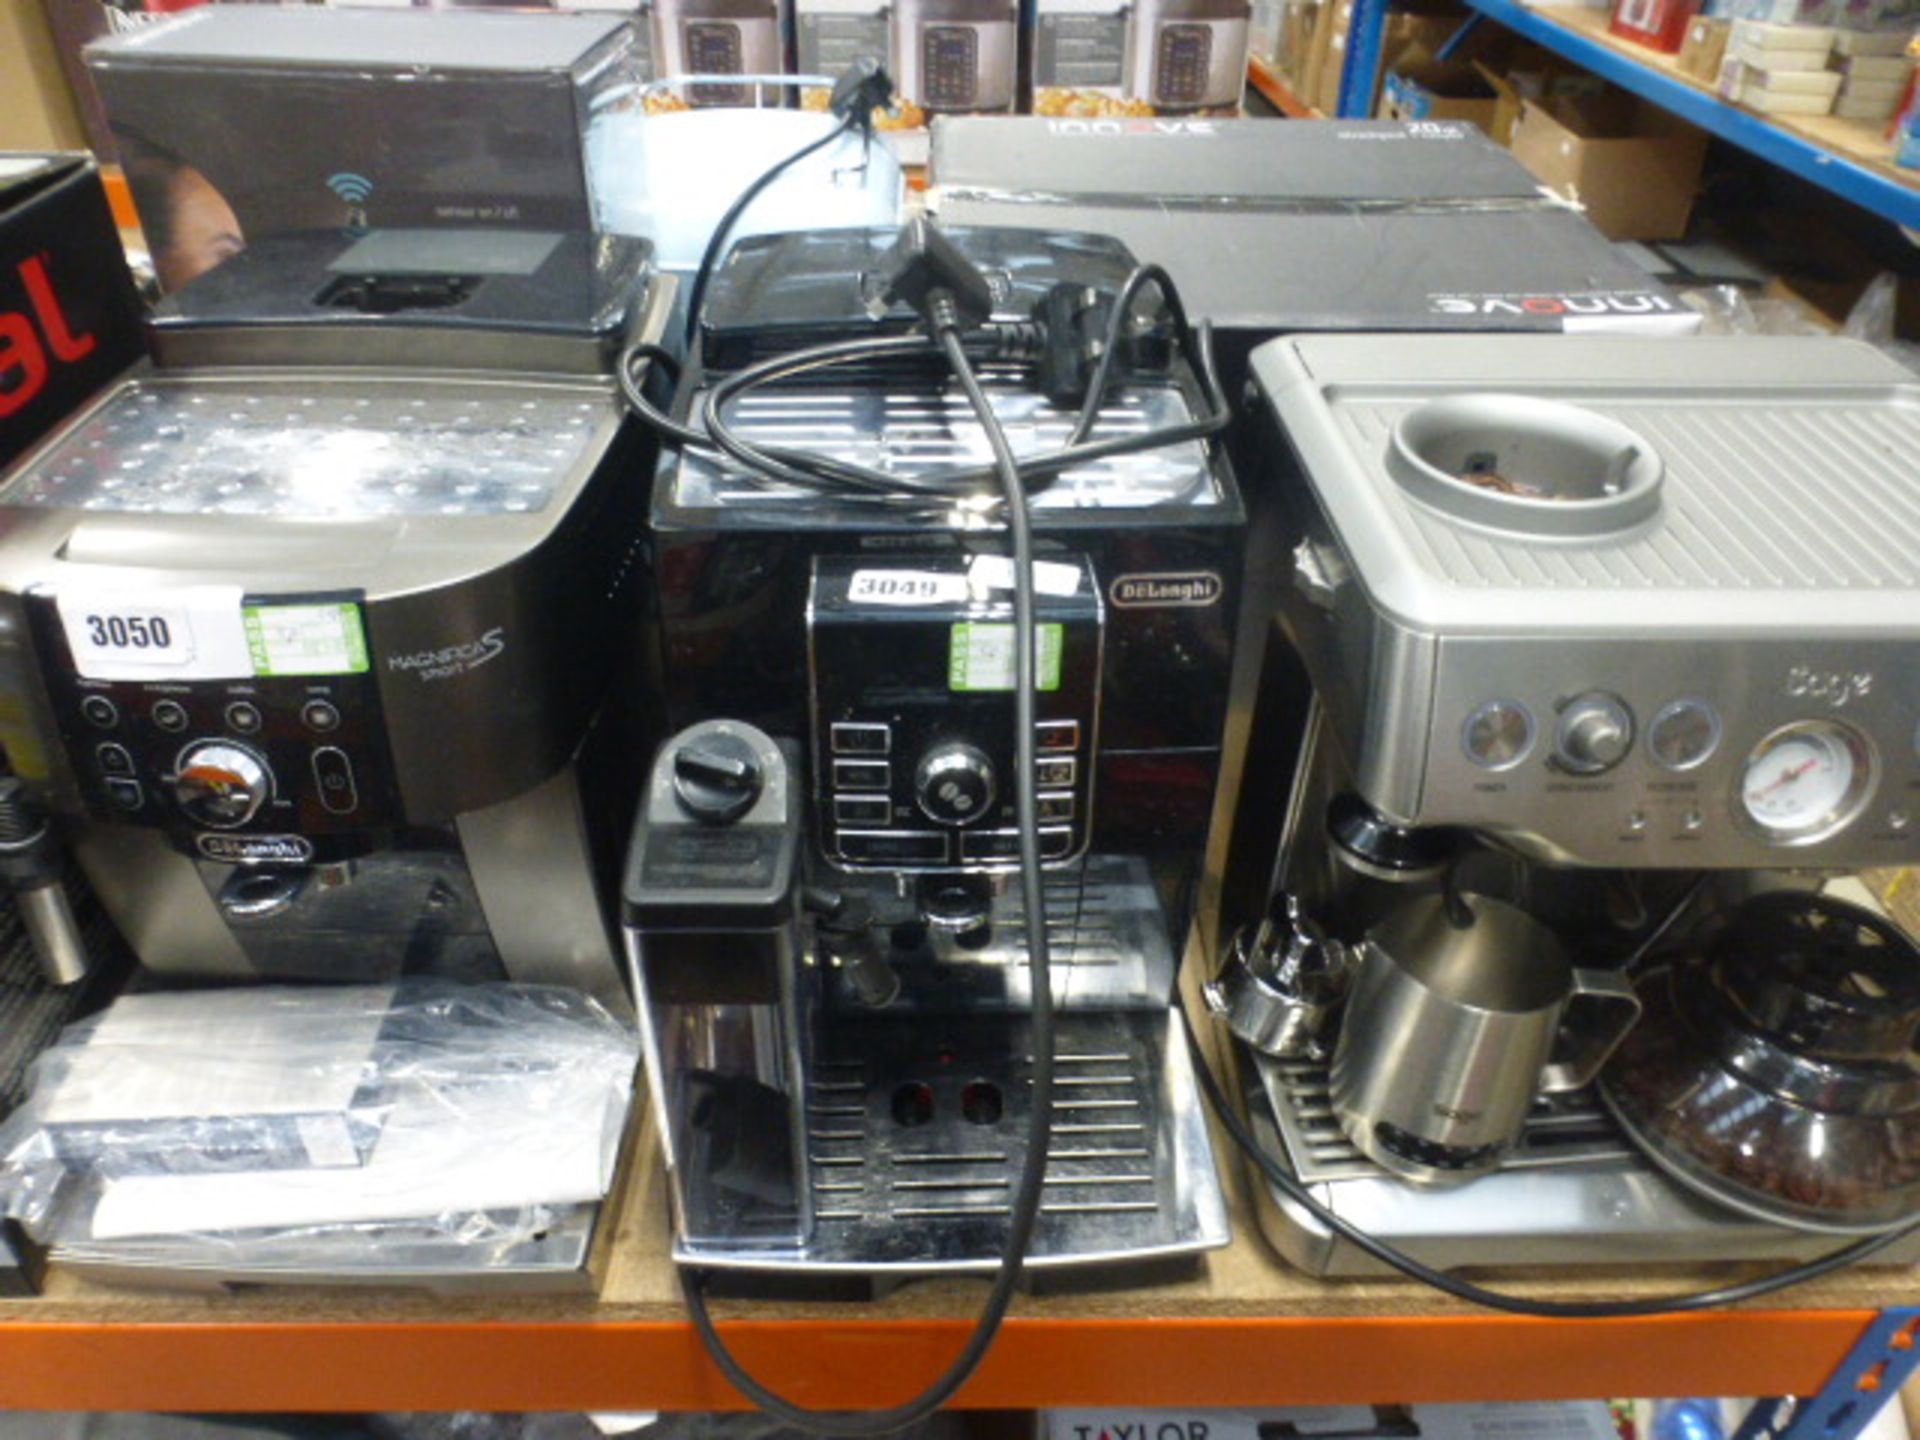 (14) Unboxed Delonghi coffee machine, no accessories